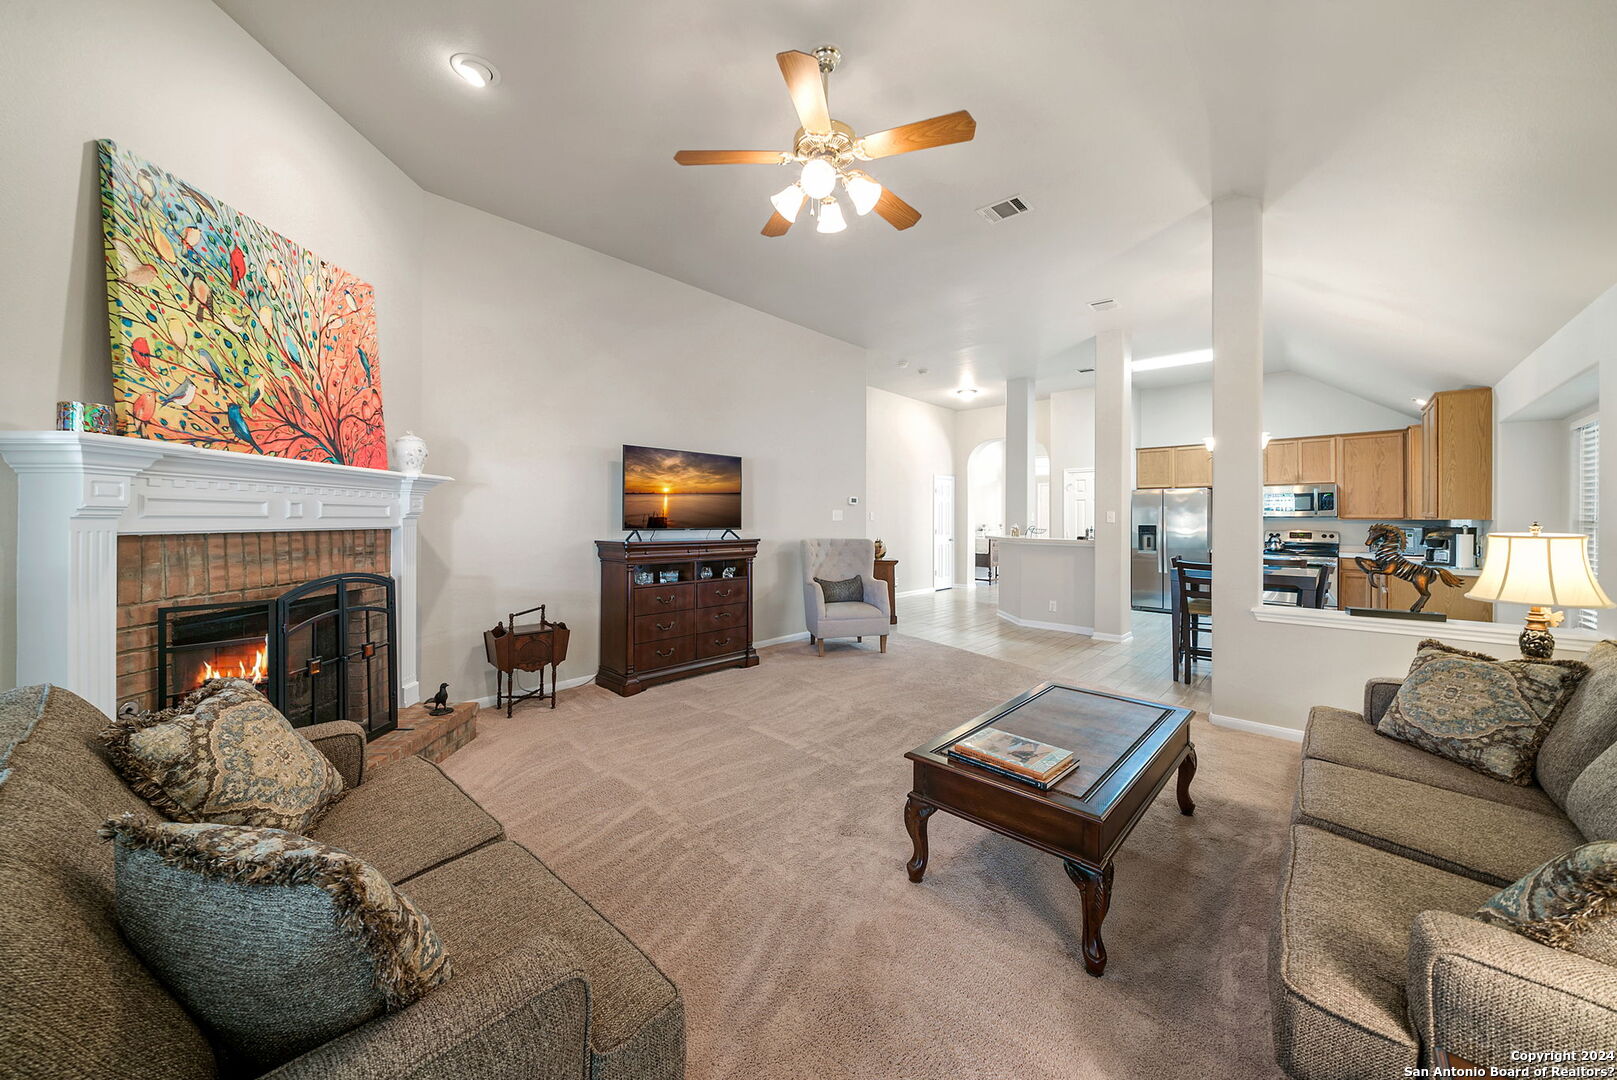 If you have additional questions regarding 5 CANTERVIEW  in San Antonio or would like to tour the property with us call 800-660-1022 and reference MLS# 1750615.